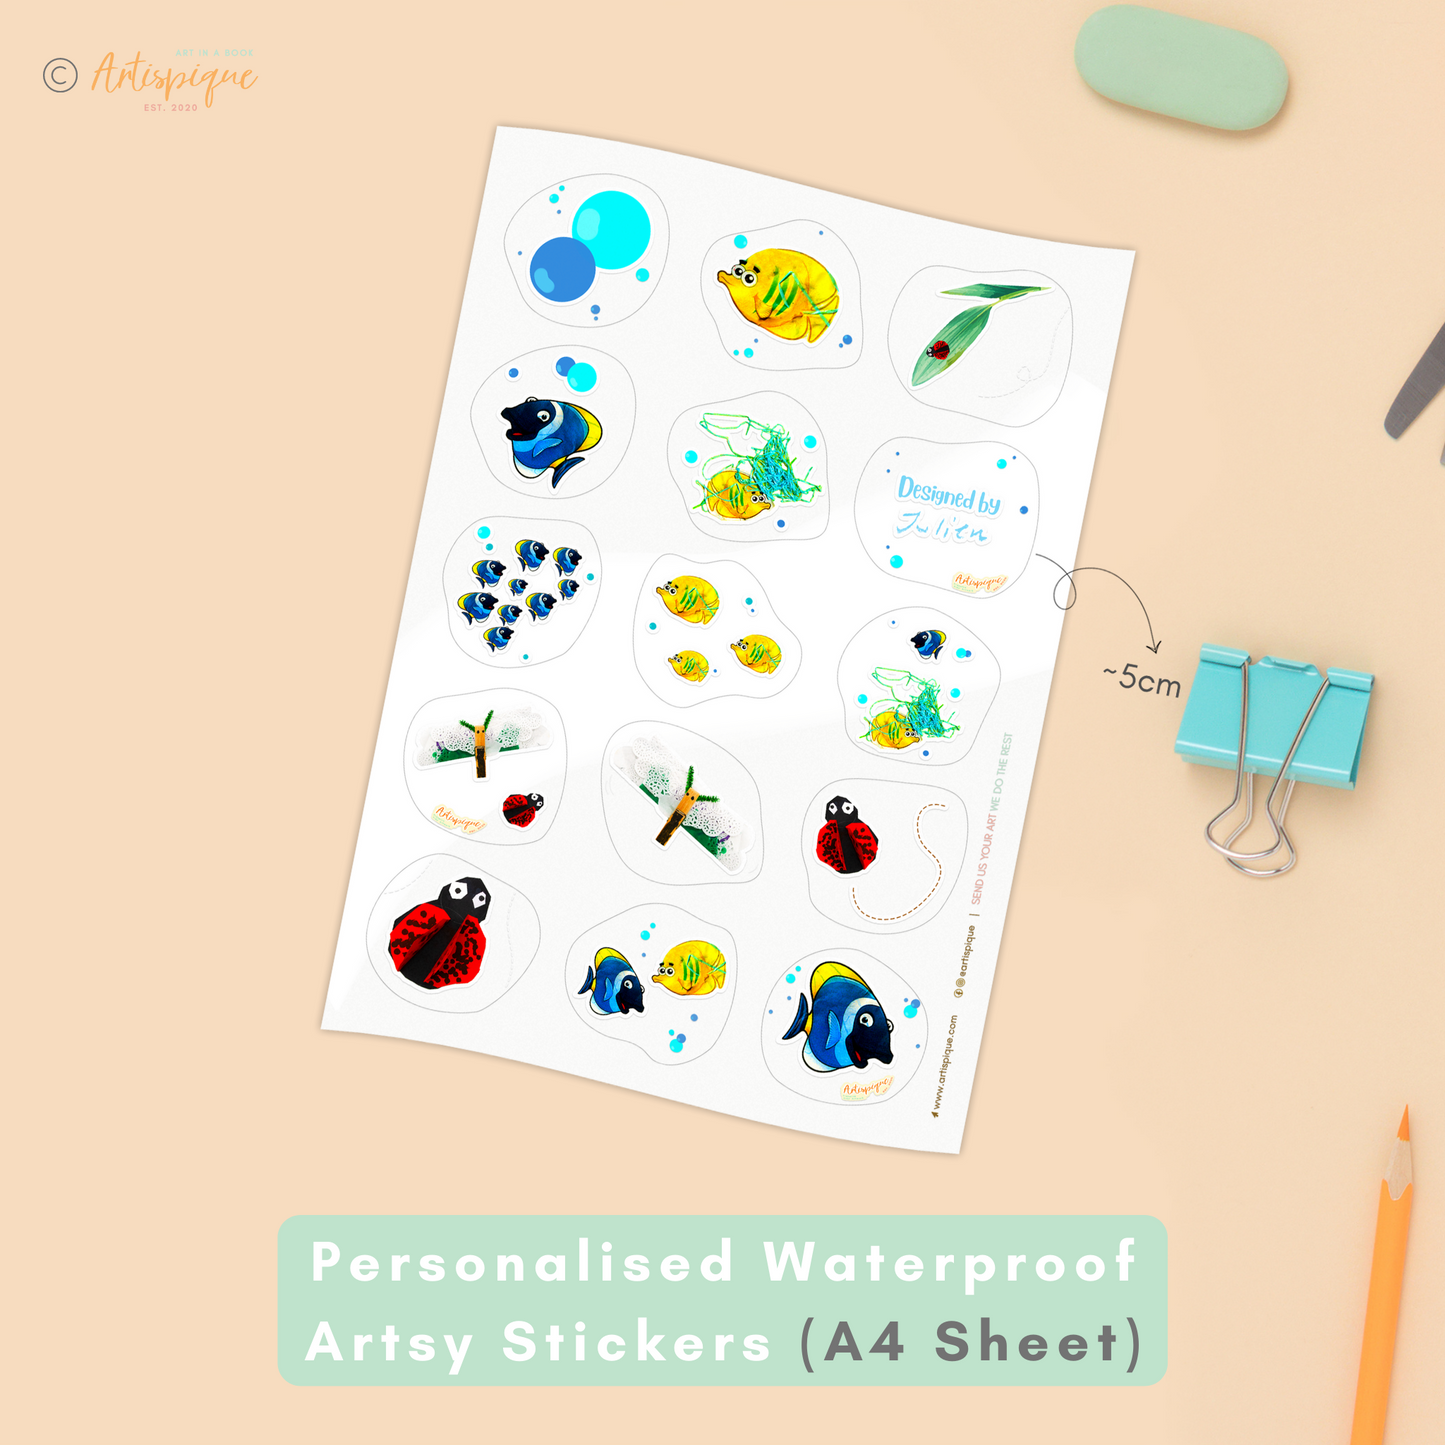 Personalised Waterproof Artsy Stickers - Set of 2 pcs of A4 sheet (30 stickers)